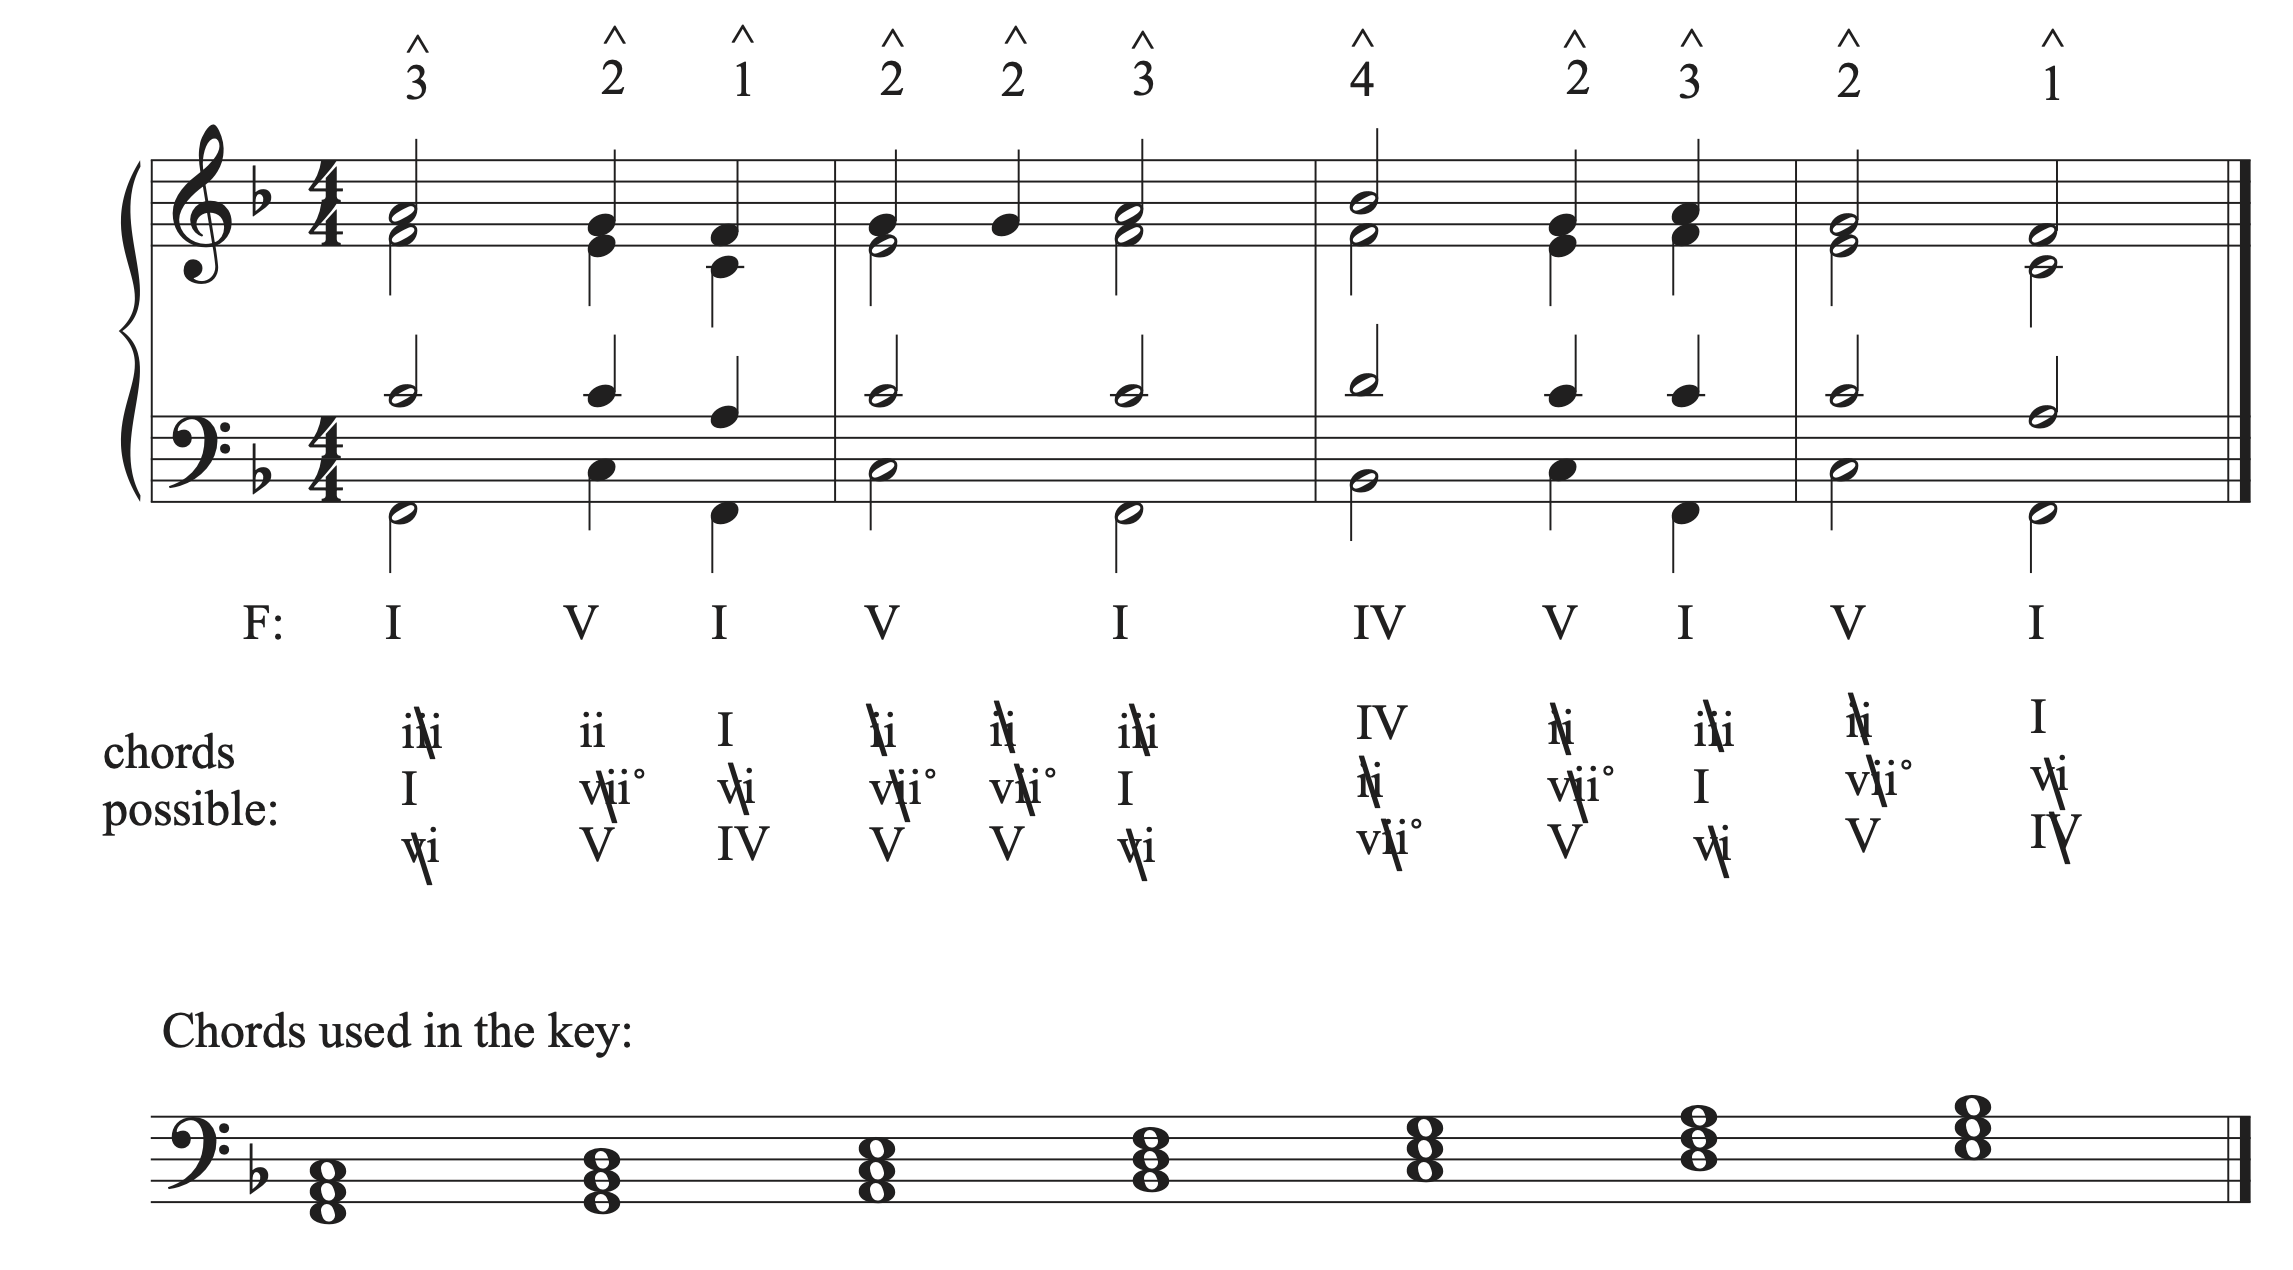 The musical example in F major with alto and tenor voices added.